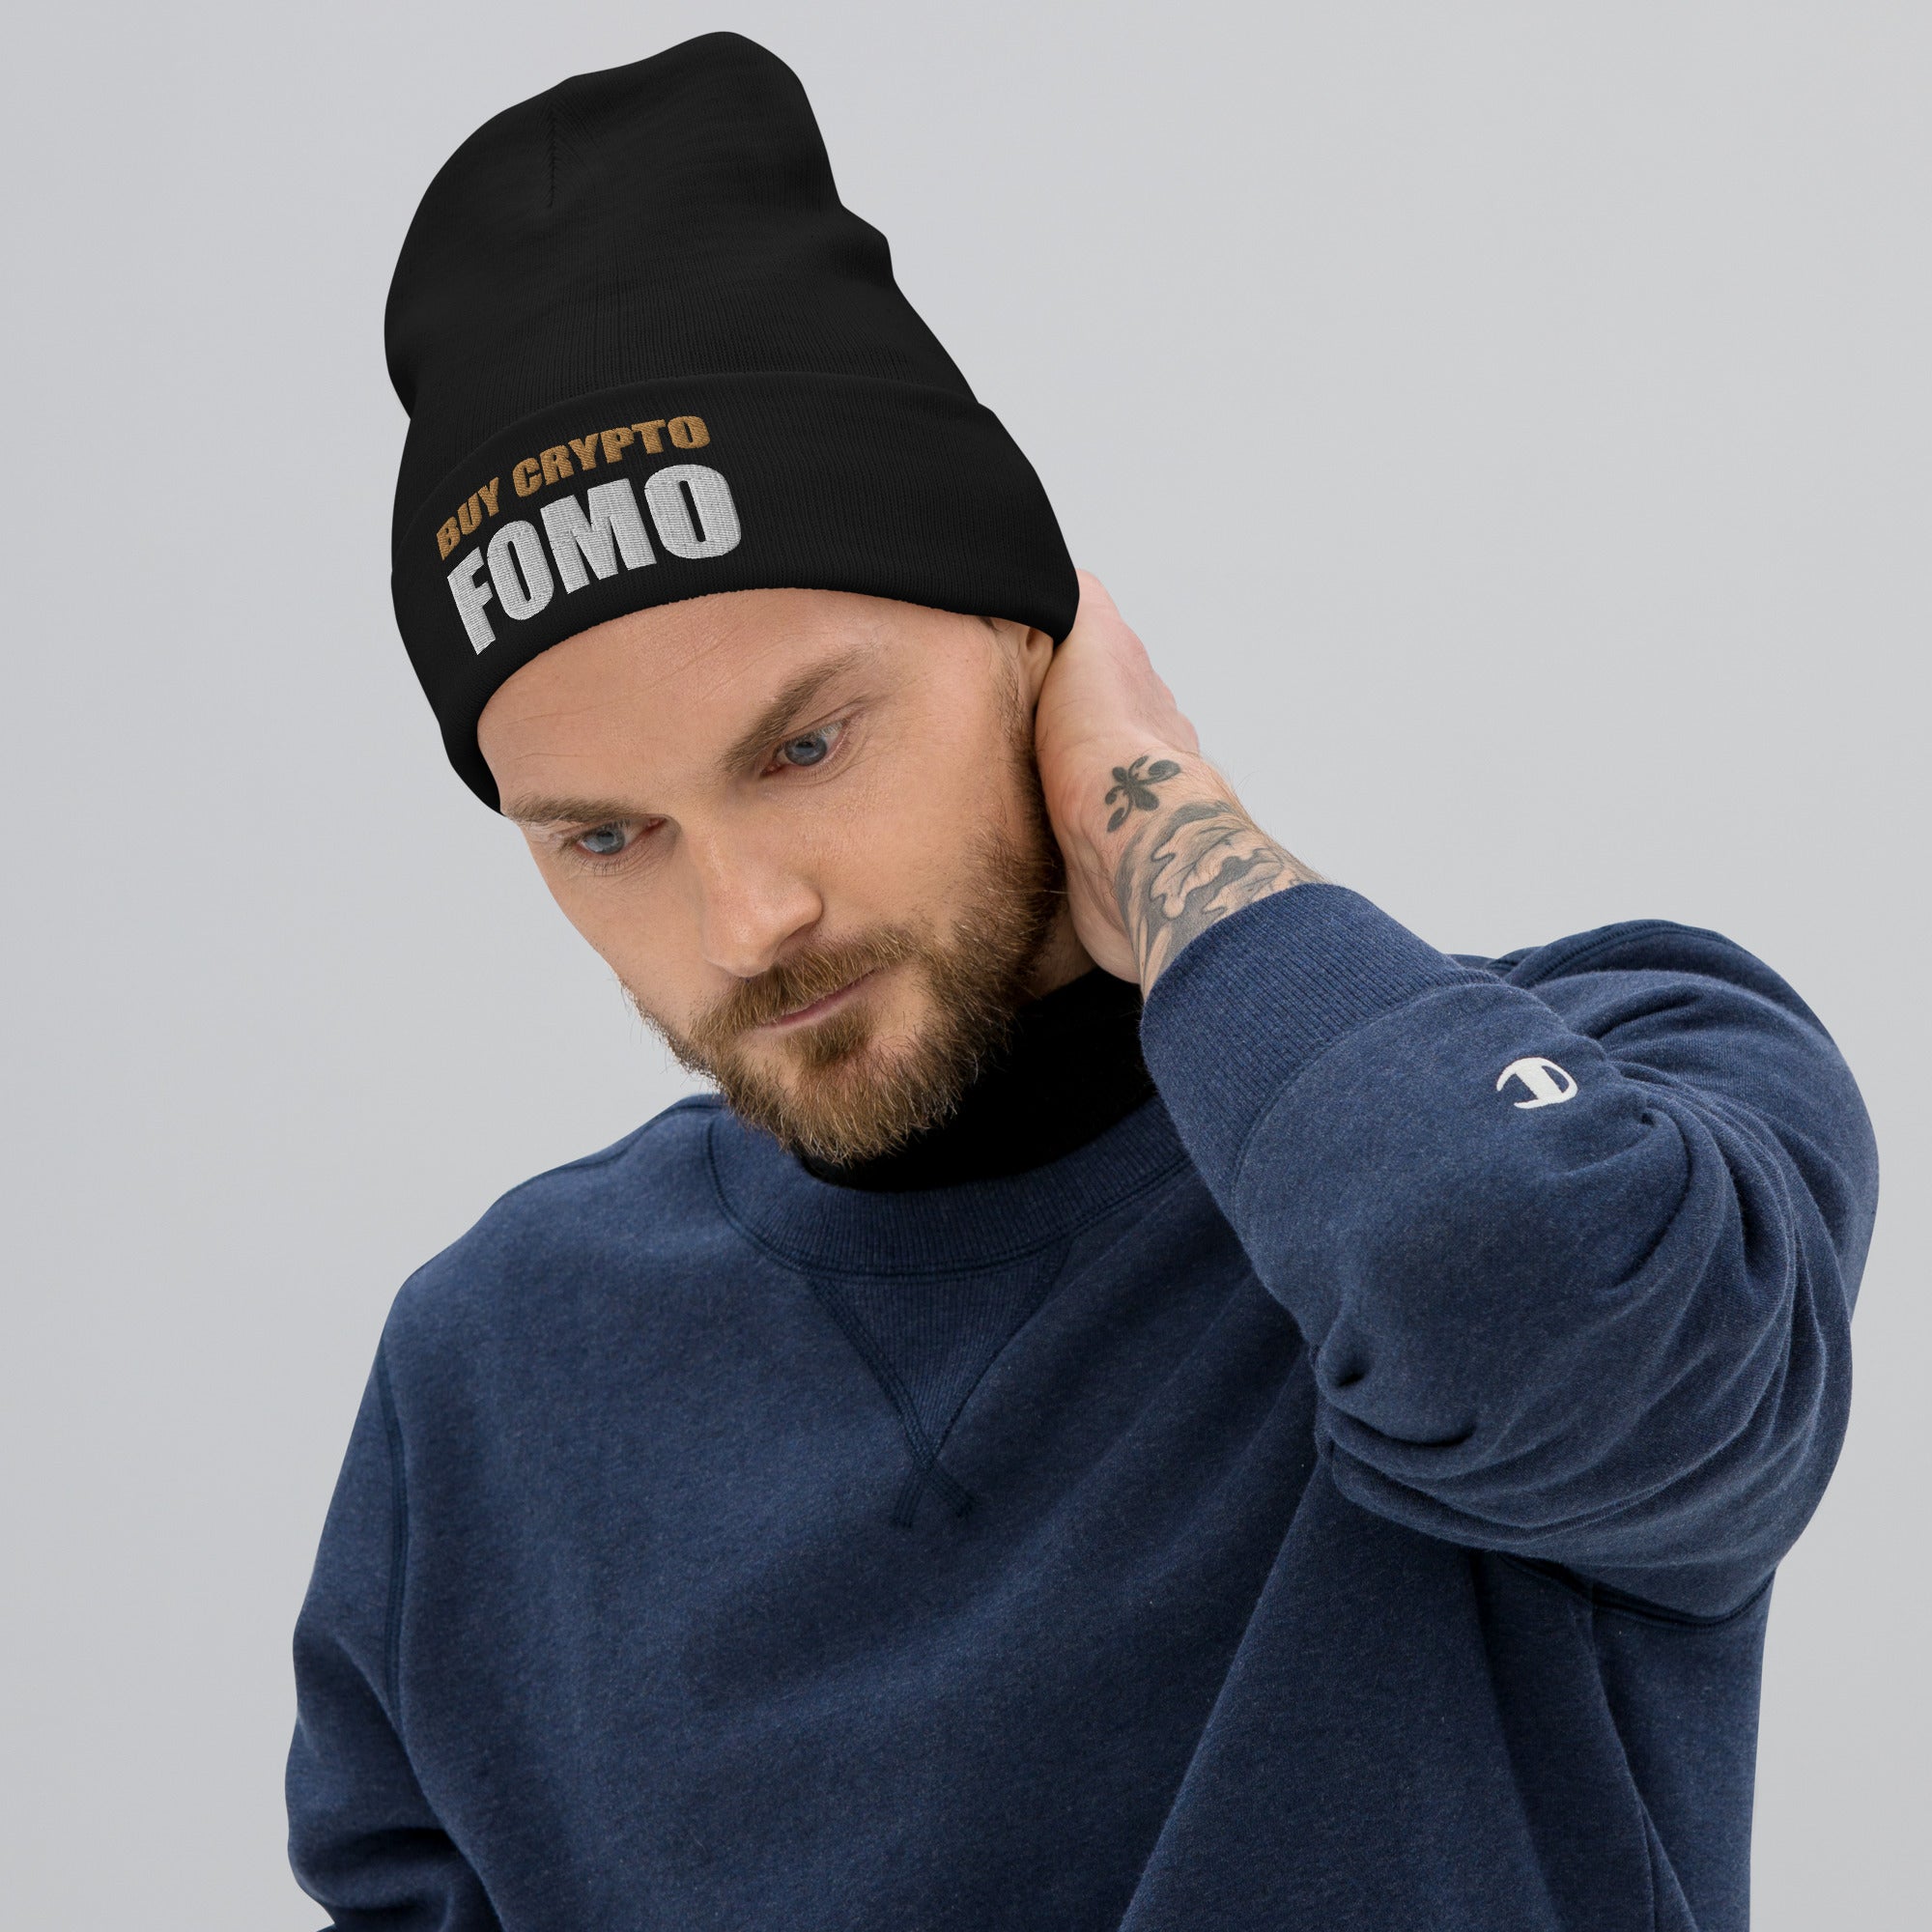 Buy Crypto Now and FOMO In Bitcoin Ethereum Embroidered Cuff Beanie Cap